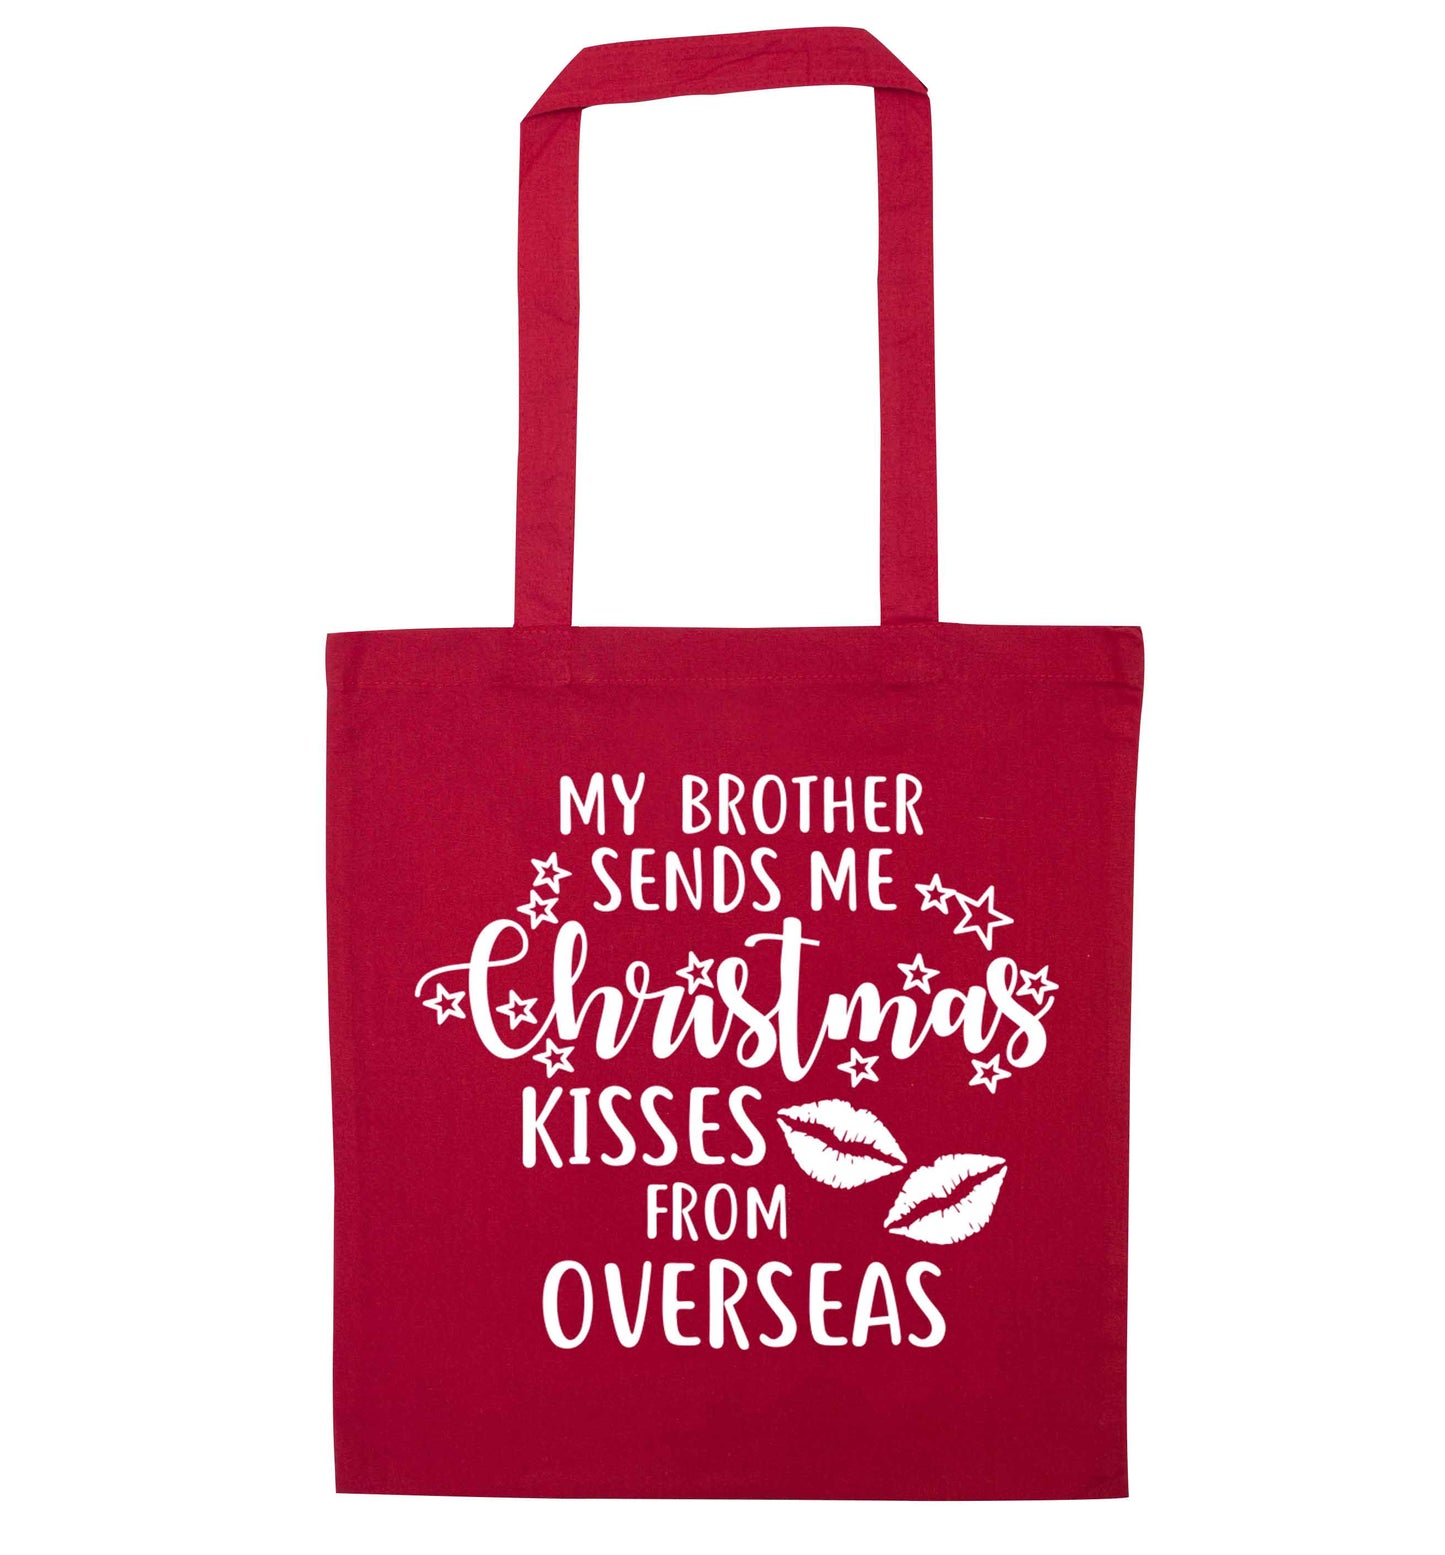 Brother Christmas Kisses Overseas red tote bag